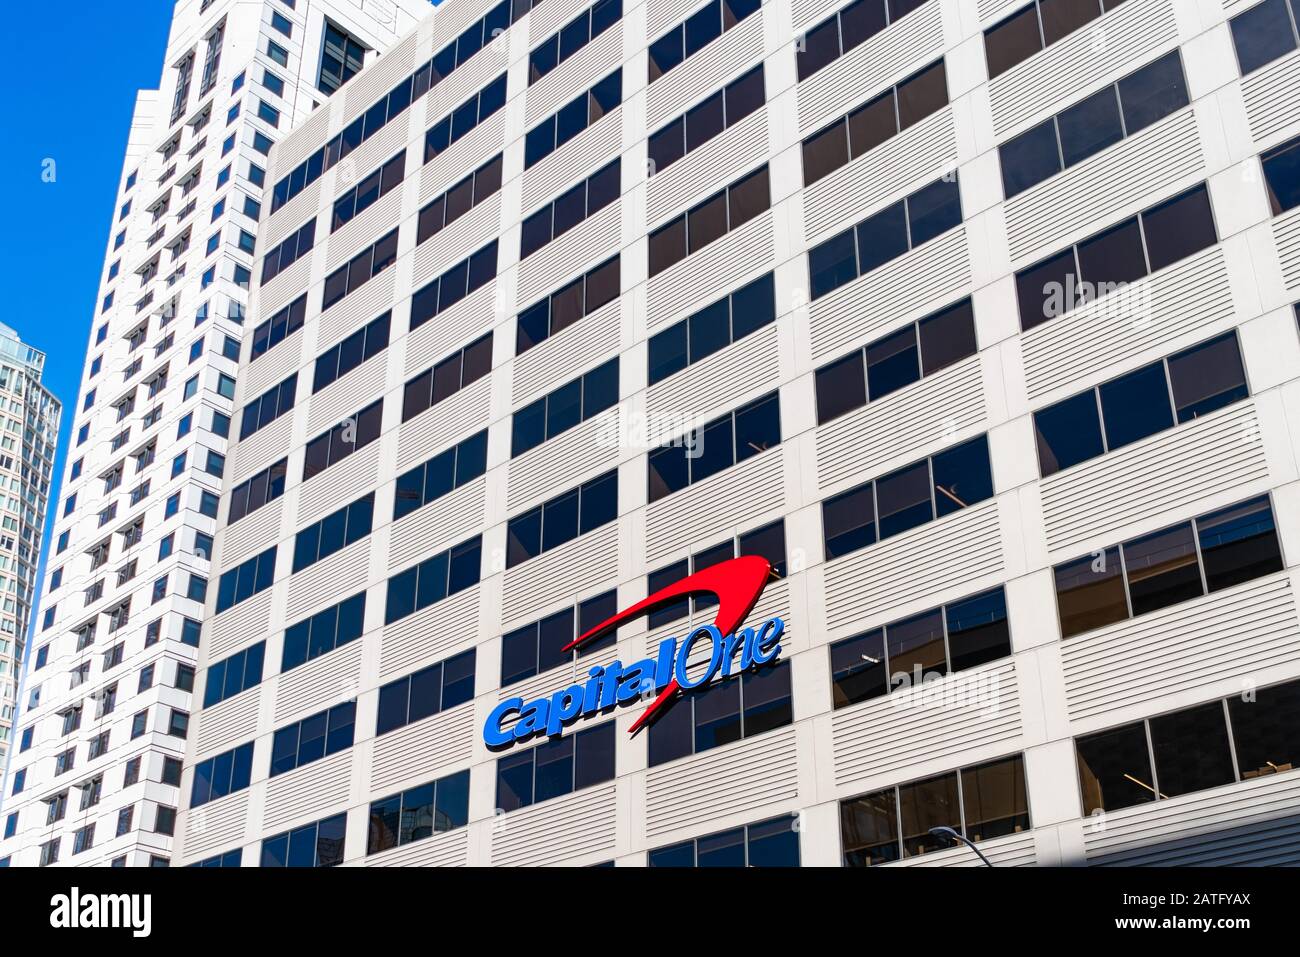 Jan 18, 2019 San Francisco / CA / USA - Capital One corporate headquarters in SOMA district; CapitalOne Financial Corporation is a bank holding compan Stock Photo